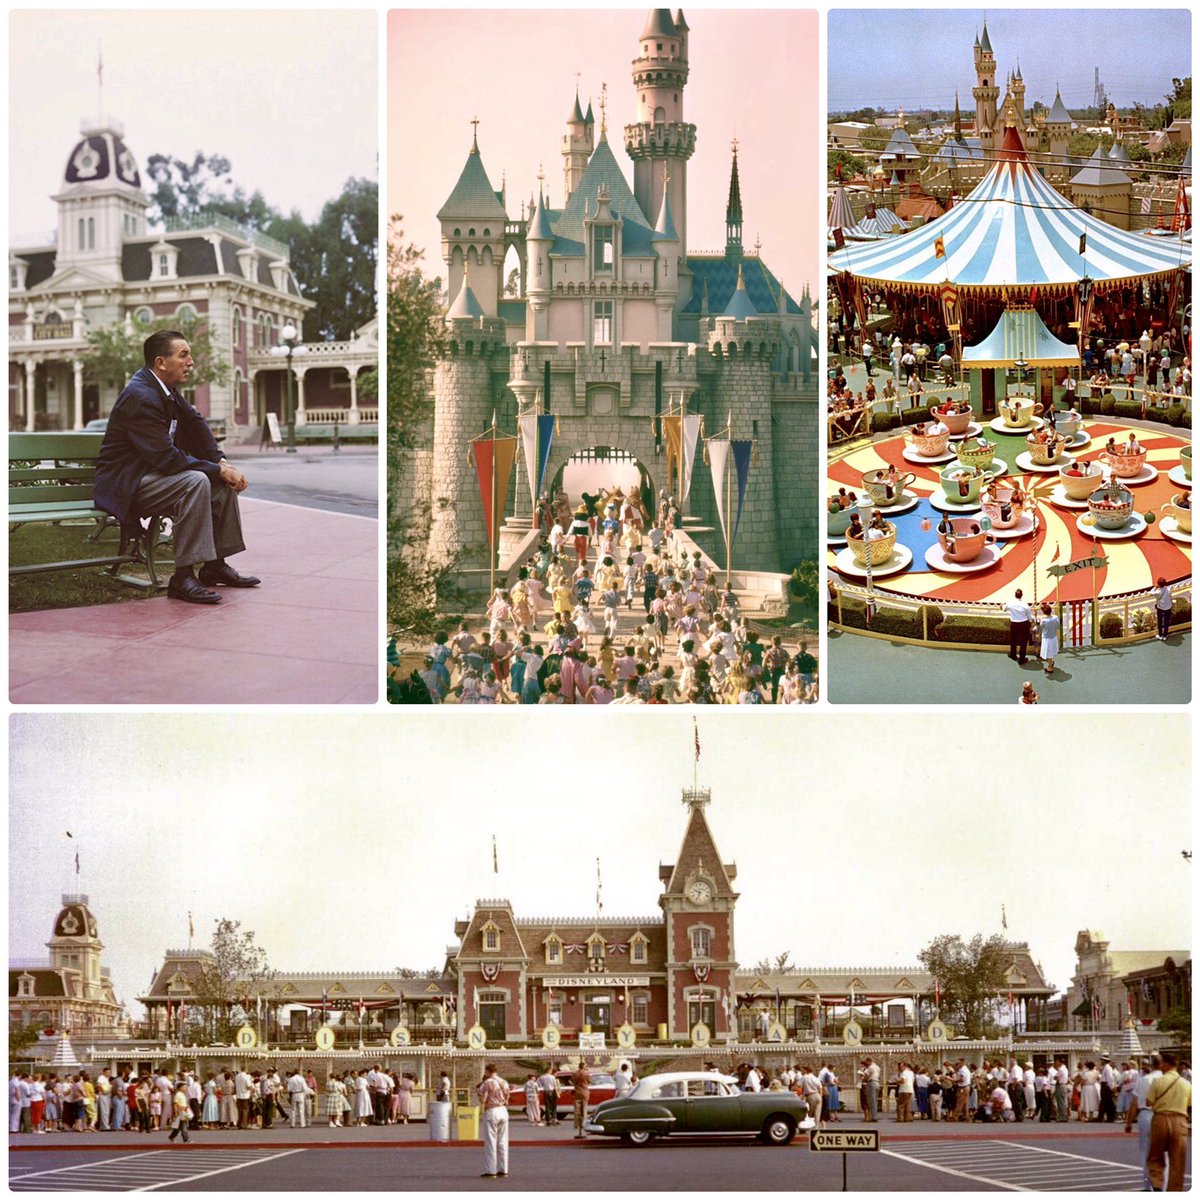 Happy 65th Anniversary to the original Disneyland in Anaheim, CA: may you always remain a unique gem with embraceable facets of wonder, fact, fun, craftsmanship and heart.

#Disneyland65